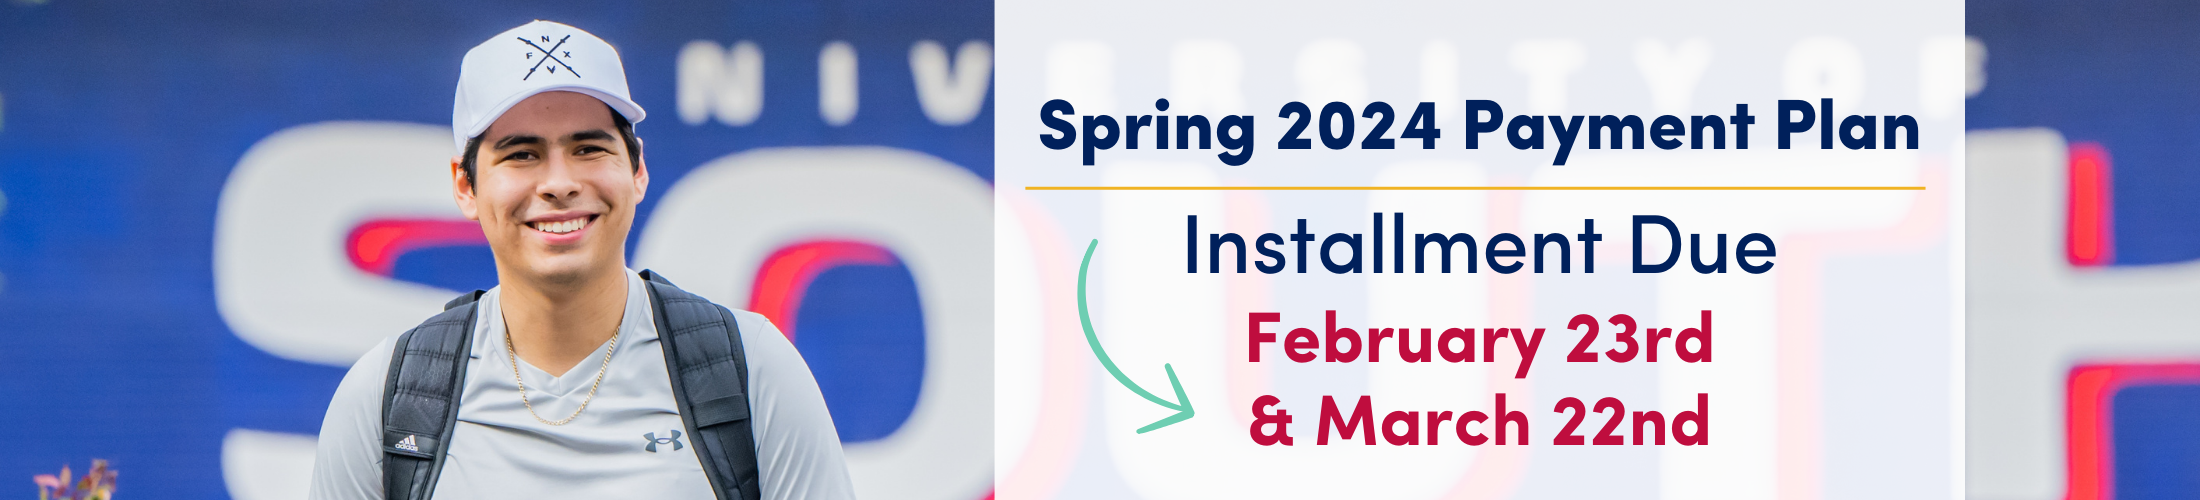 Spring 2024 Payment Plan Installment Due February 23 and March 22